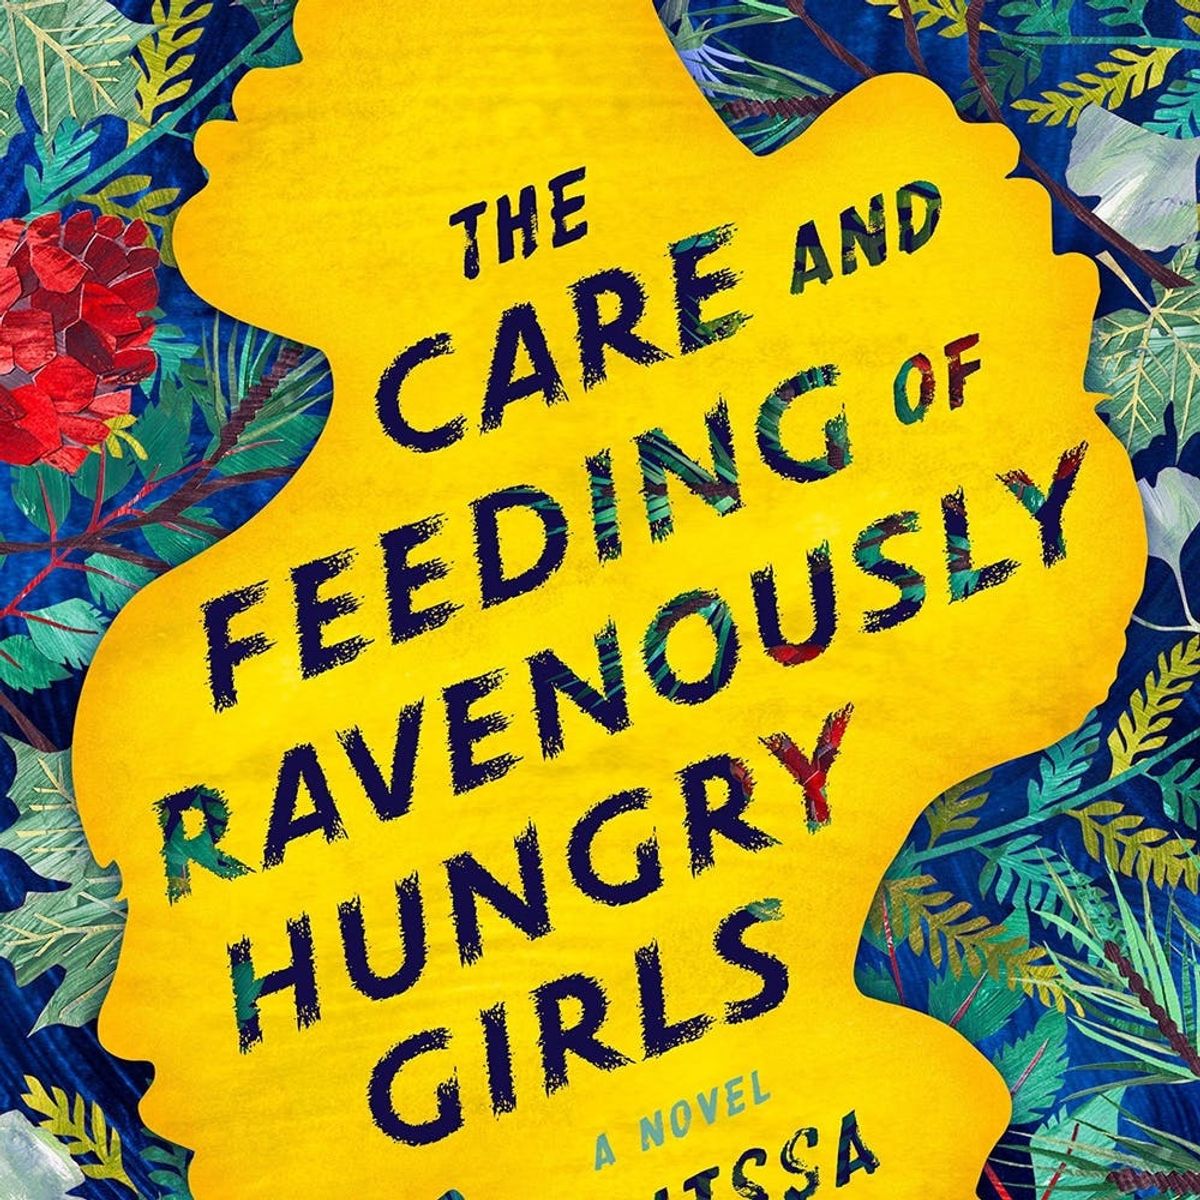 12 Can’t-Miss Books by Women to Read This Year